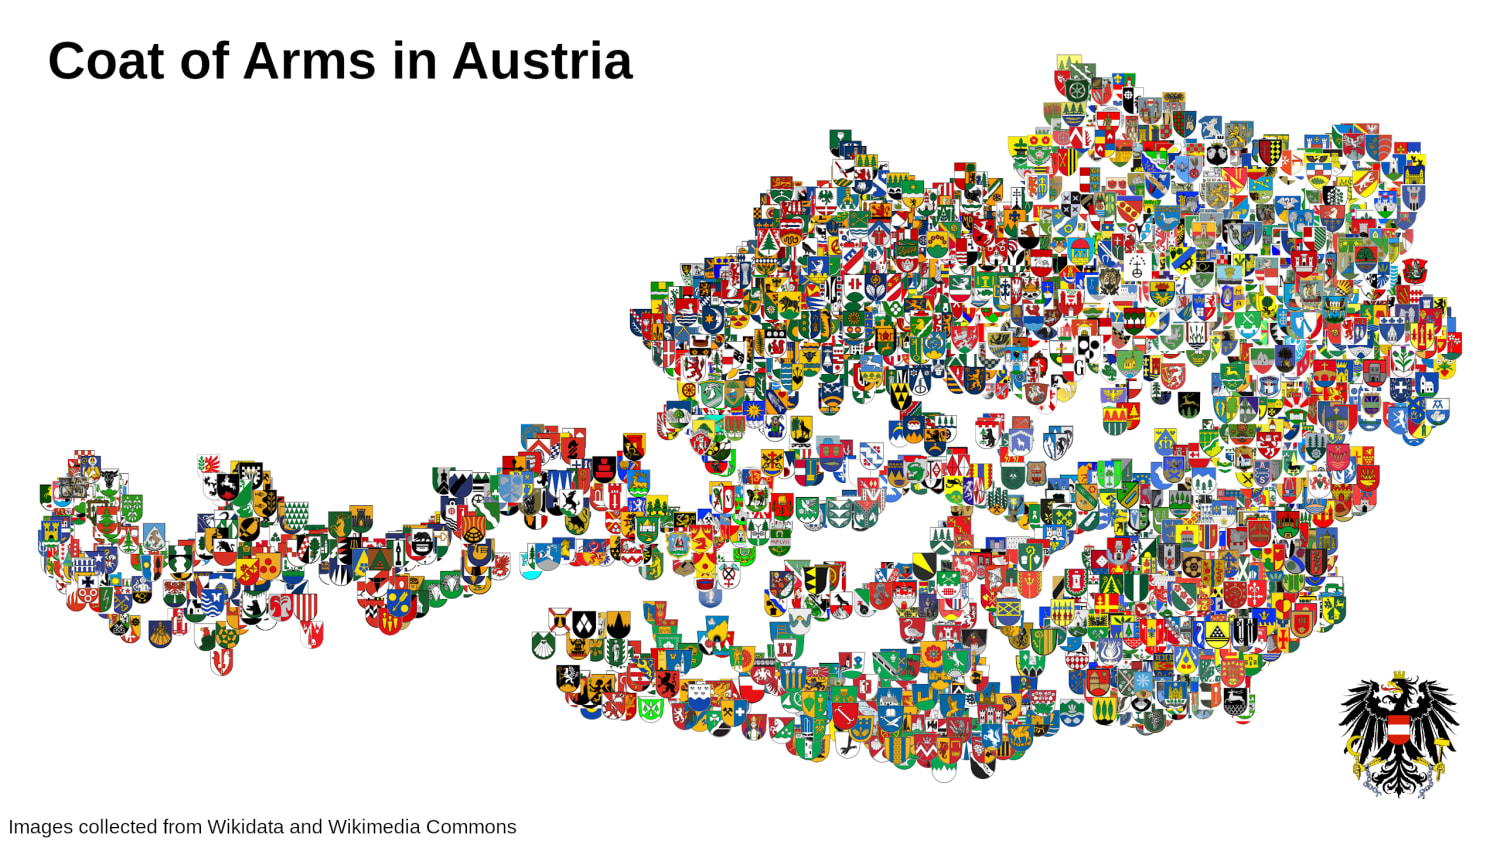 Coat of Arms in Austria made with Wikidata, Wikimedia Commons, and Python